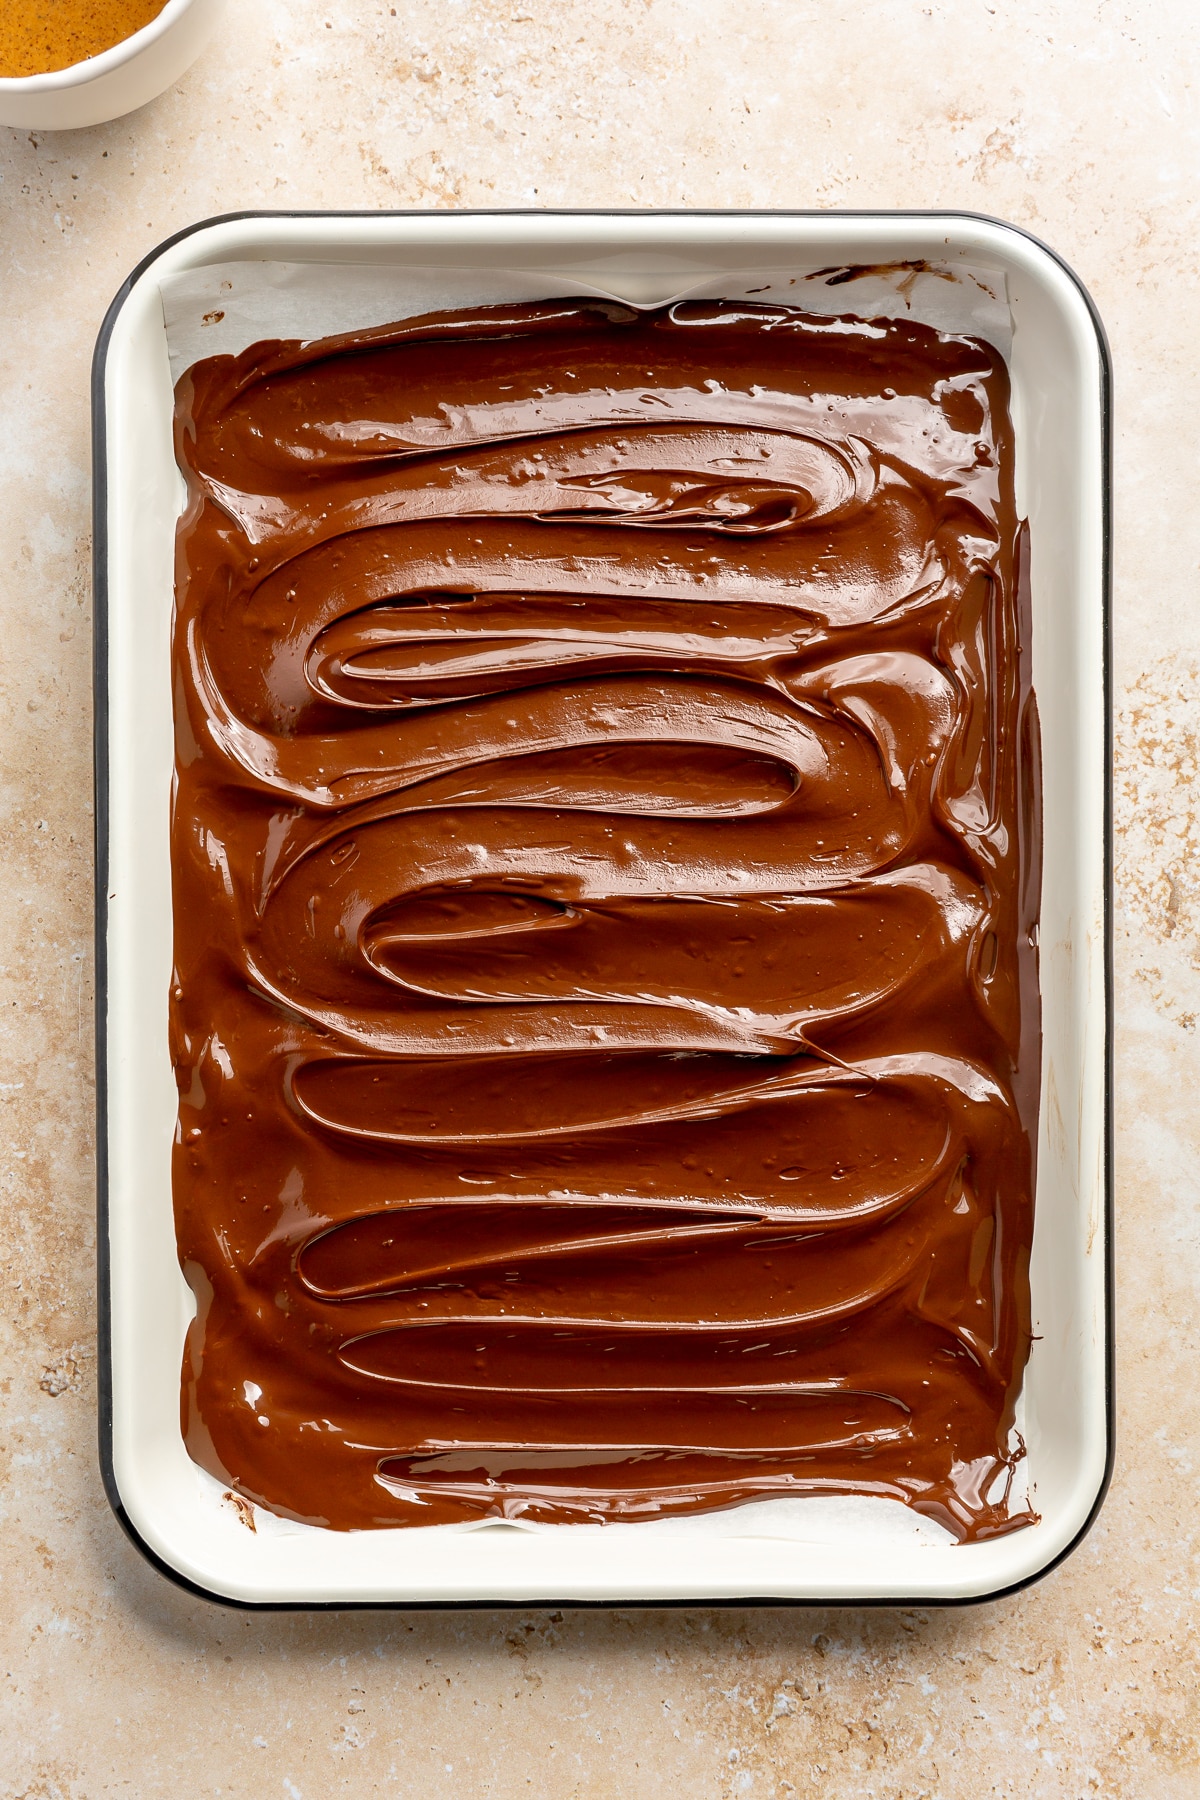 Melted chocolate has been spread in an even layer over the entire parchment lined baking tray.